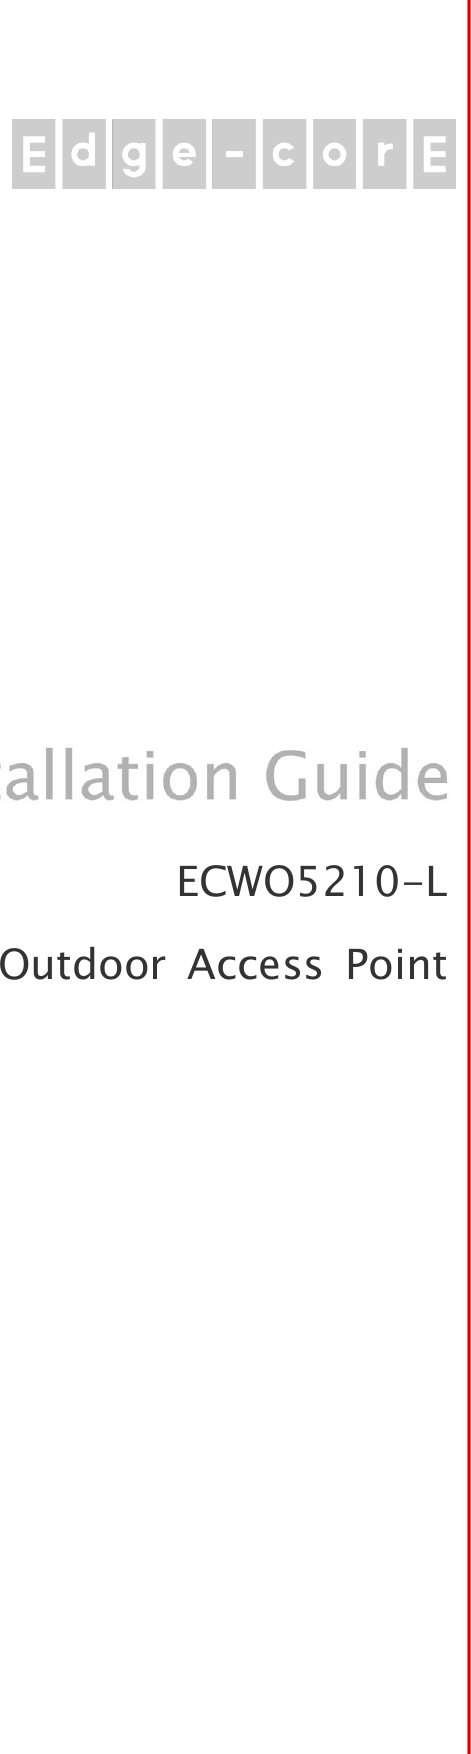   ECWO5210-L Outdoor  Access  Point 